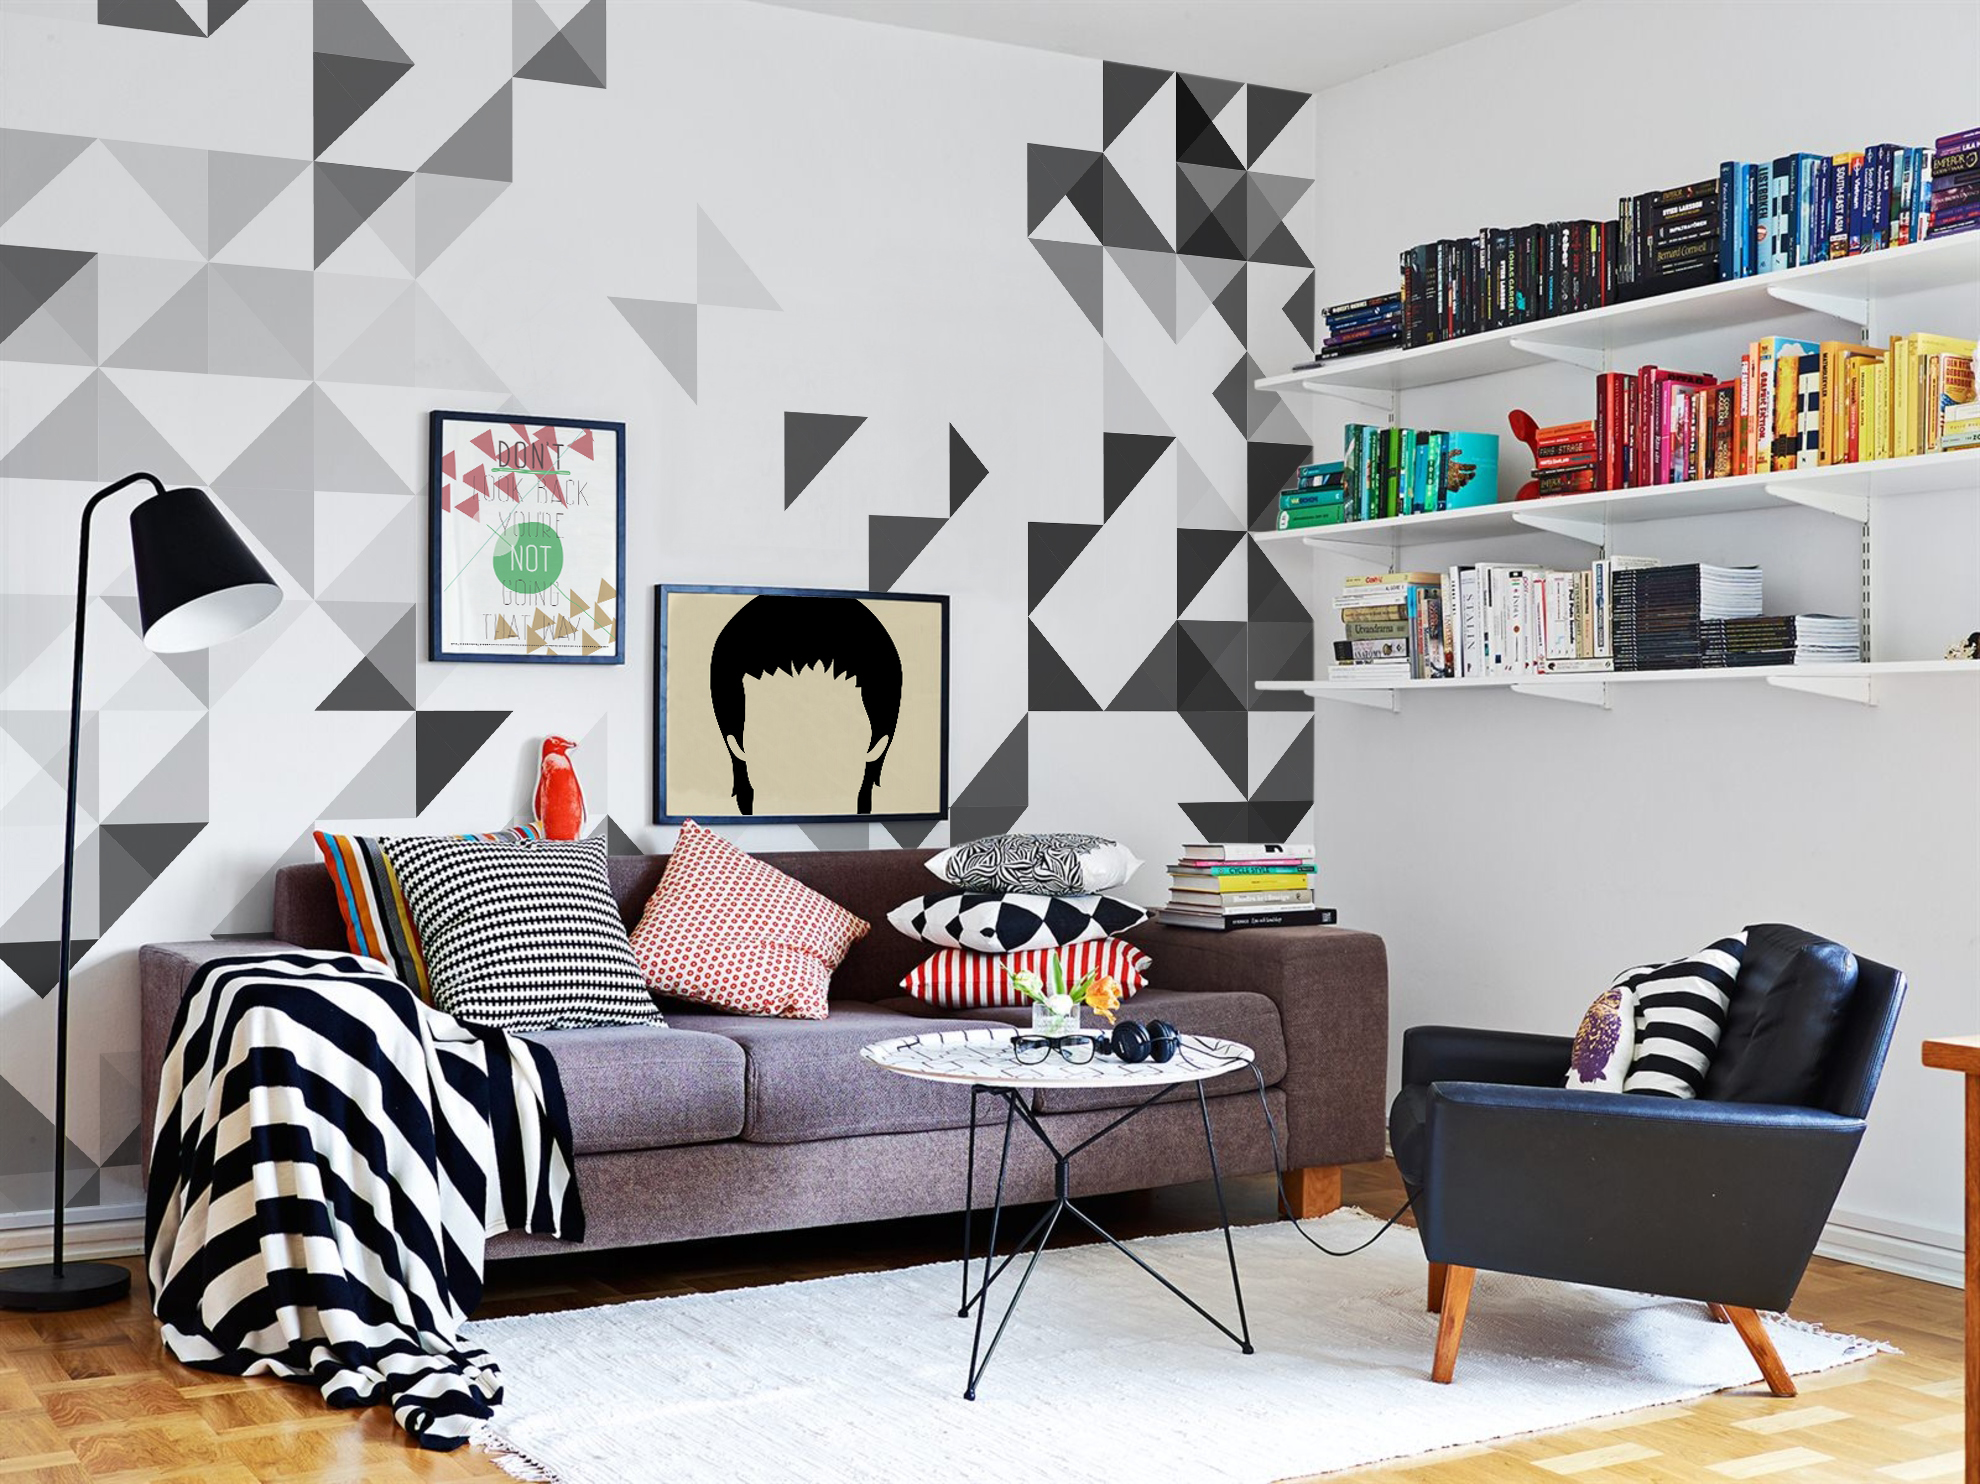 Leeward • Scandinavian - Living room - Wall Murals - Posters - Art & lifestyle - Textures and patterns - Black and white